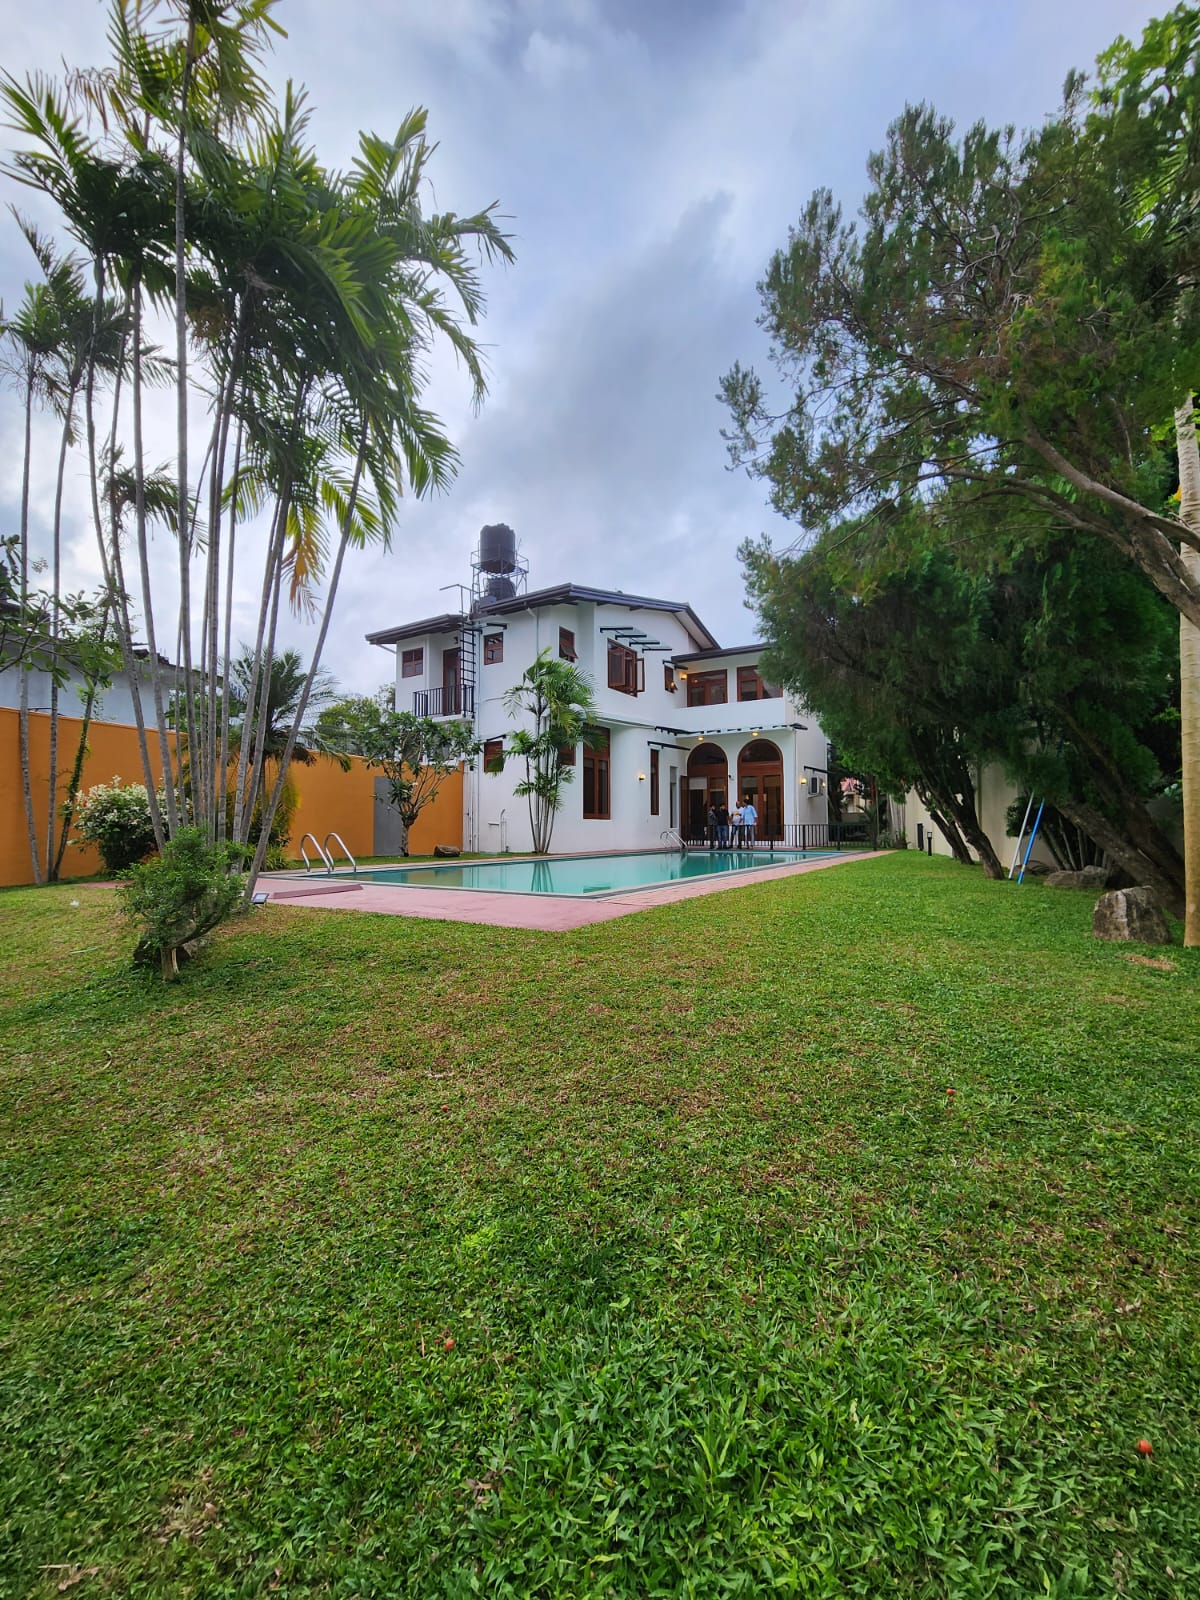 Luxury House with Pool for Rent Nawala - 6 Bedrooms & 6 Bathrooms - 800,000 LKR per Month